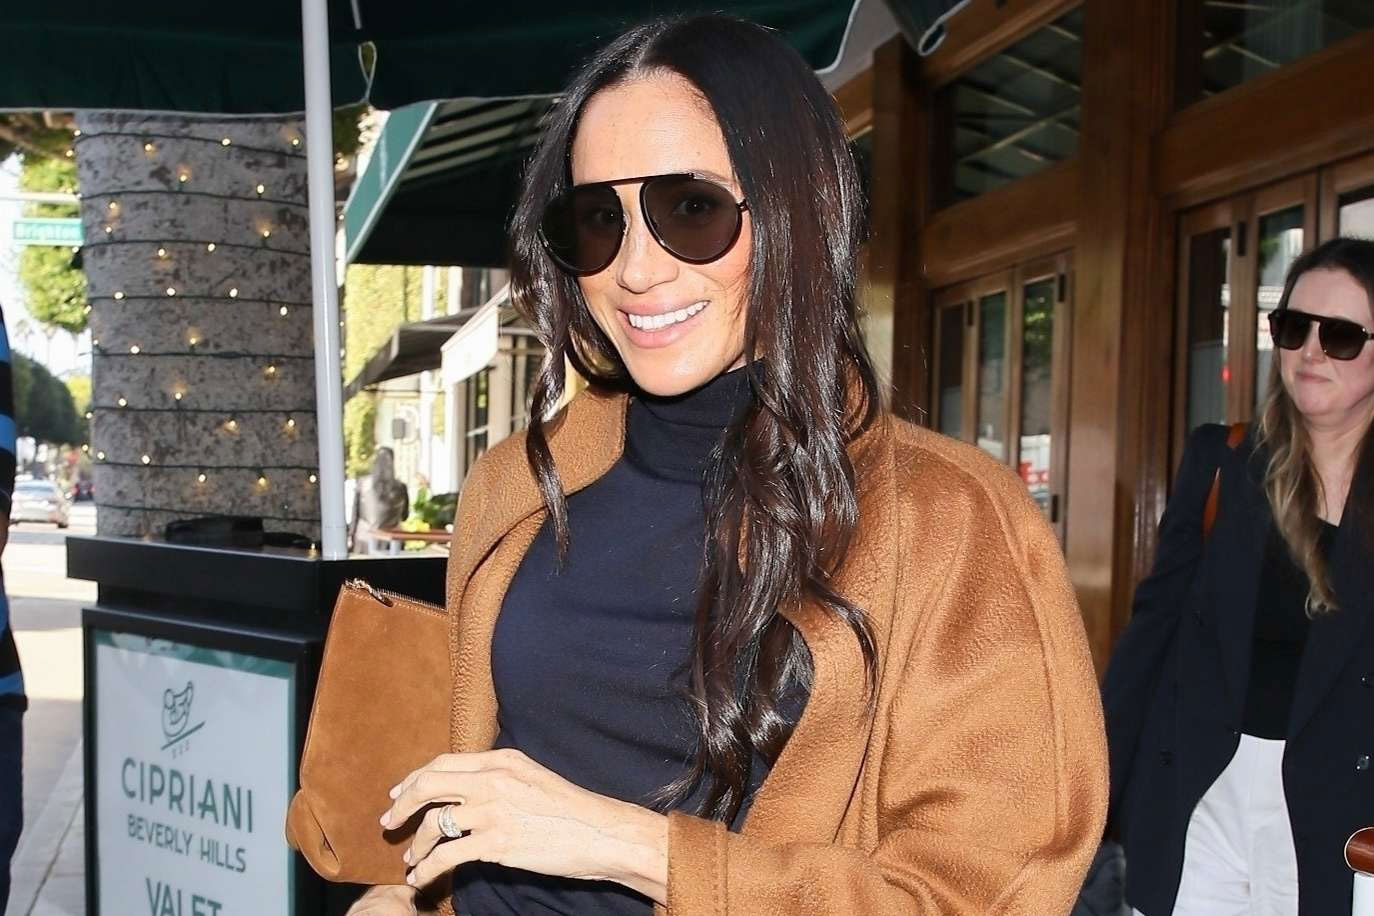 Meghan Markle is enjoying her time in the States as she plans a day out with her girl squad